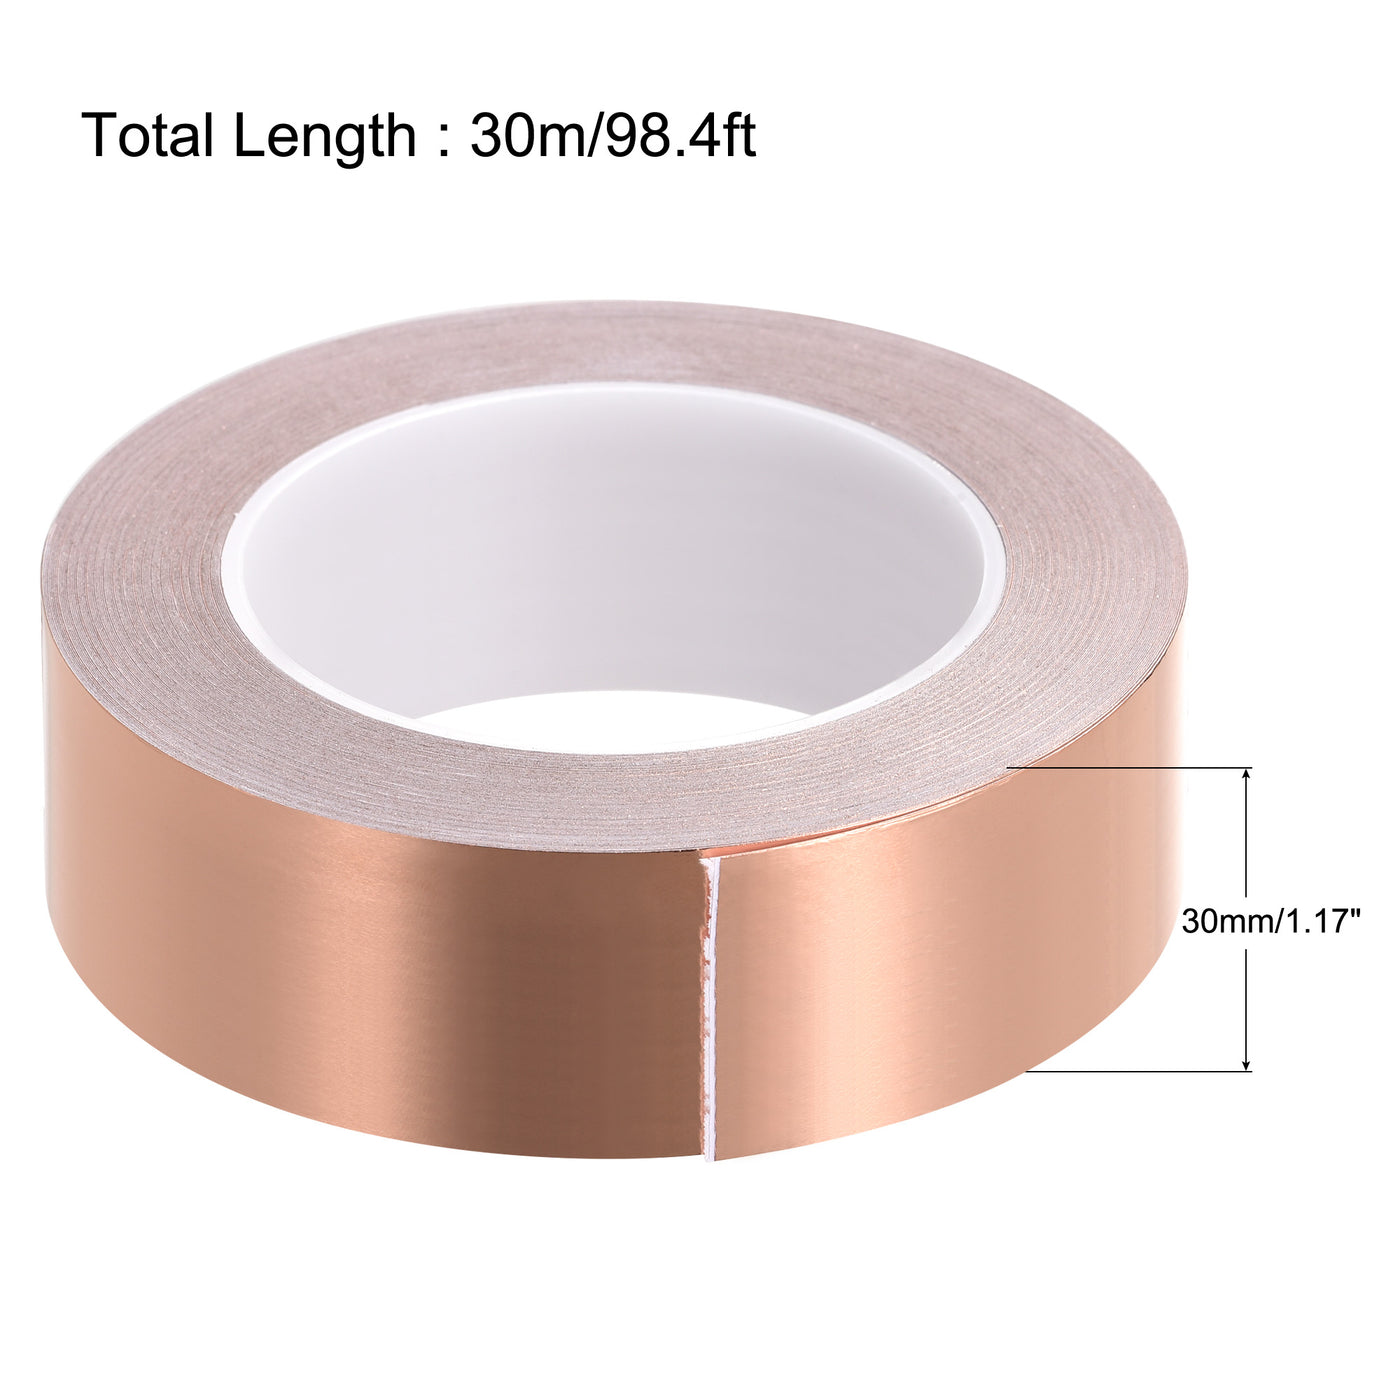 uxcell Uxcell Single-Sided Conductive Tape Copper Foil Tape 30mm x 30m/98.4ft 1pcs